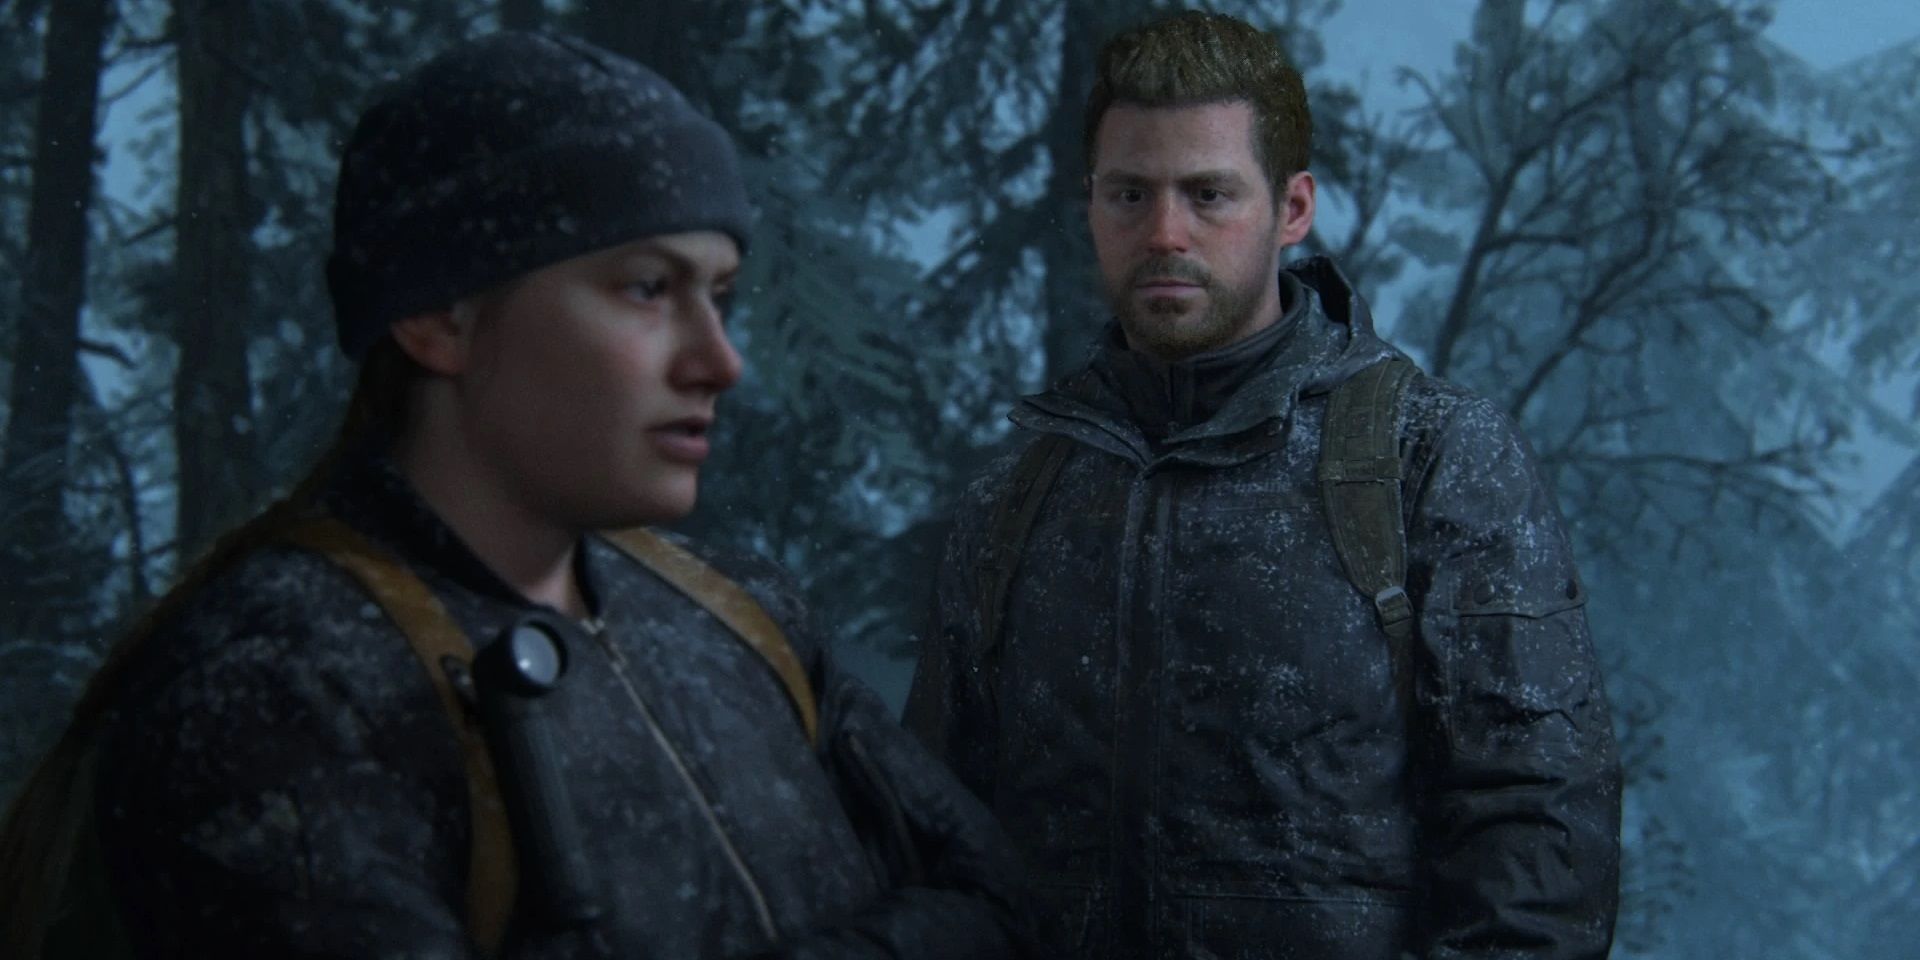 Abby and Owen in the snow in The Last of Us Part II